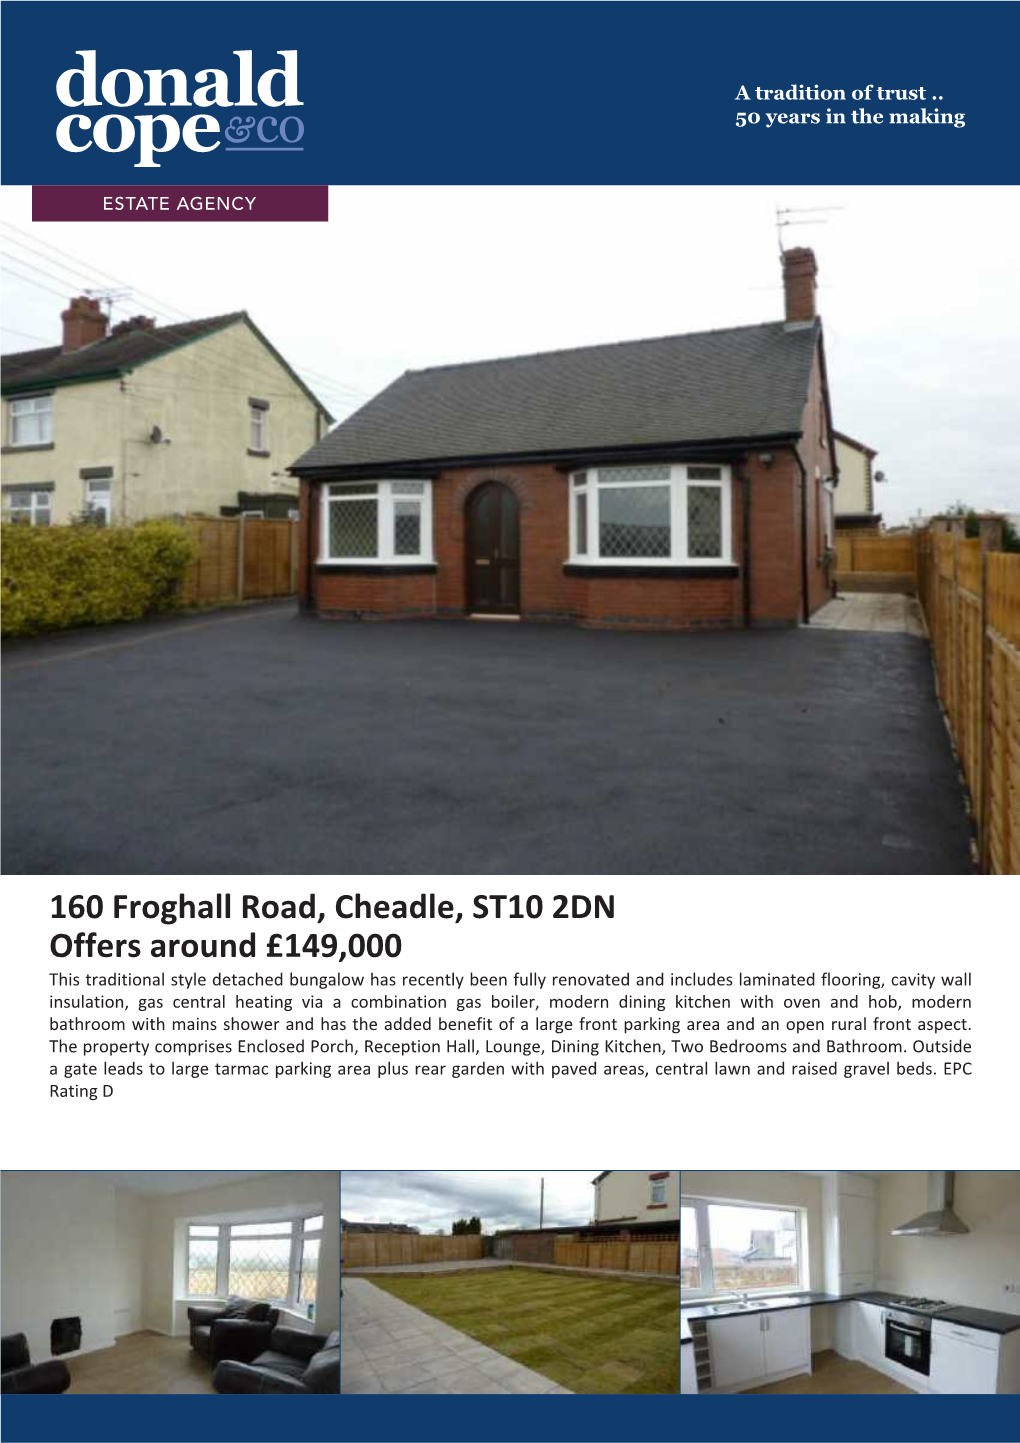 160 Froghall Road, Cheadle, ST10 2DN Offers Around £149,000